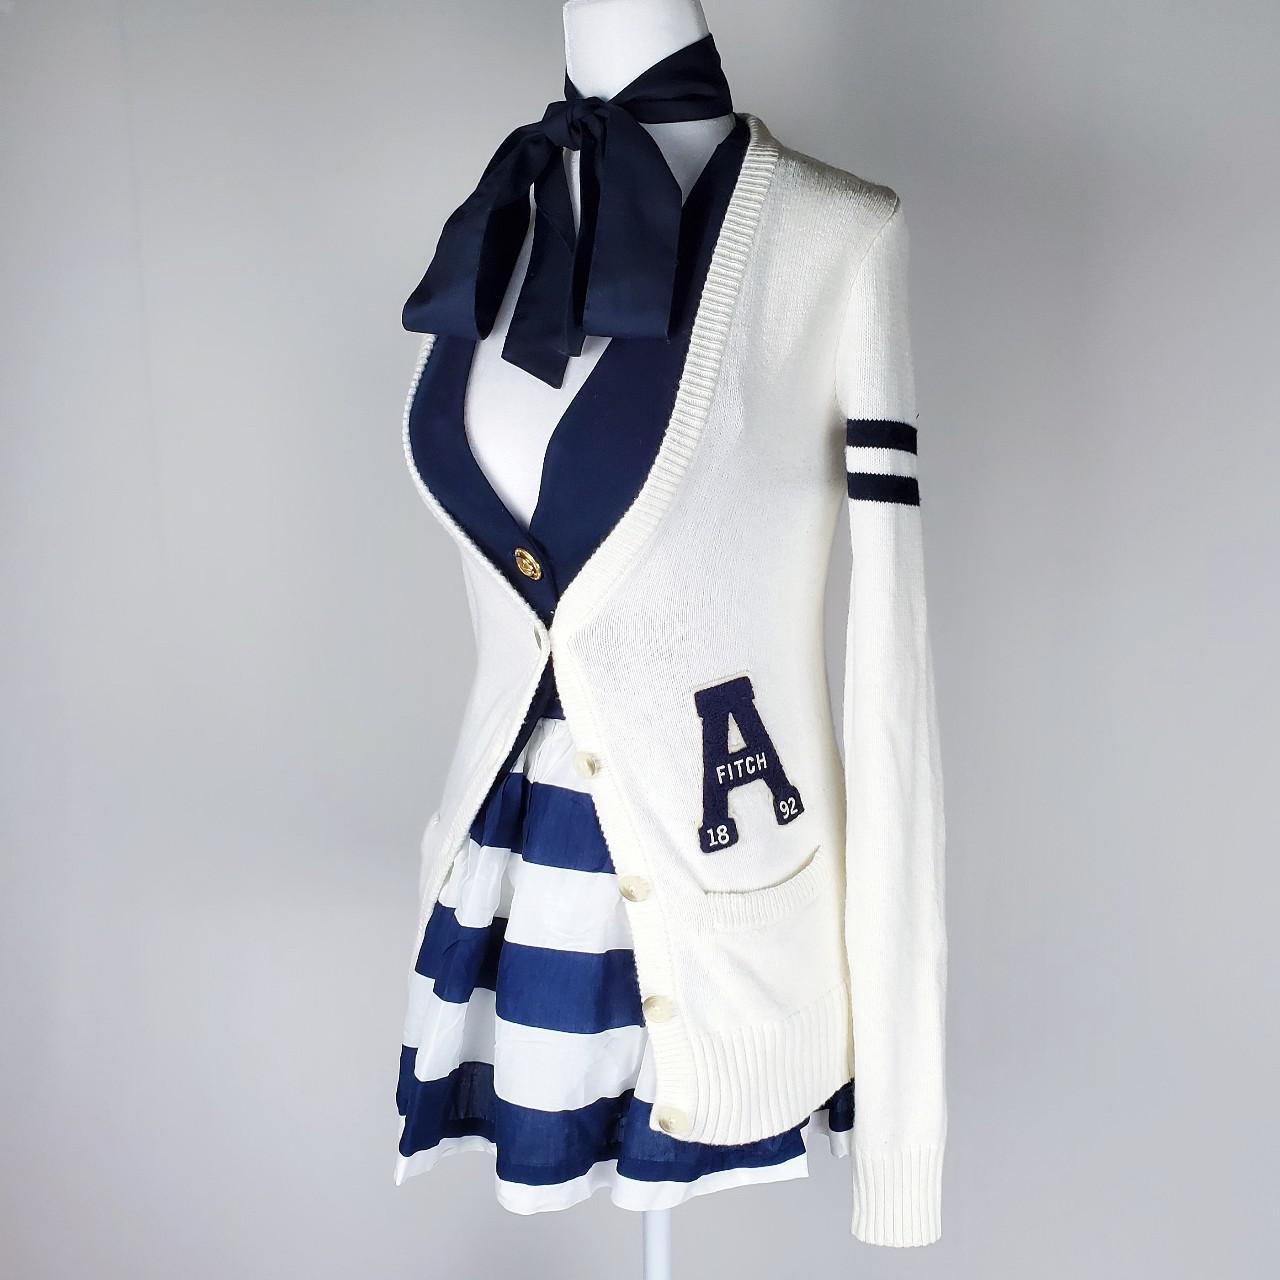 Abercrombie & Fitch Women's Navy and White Skirt